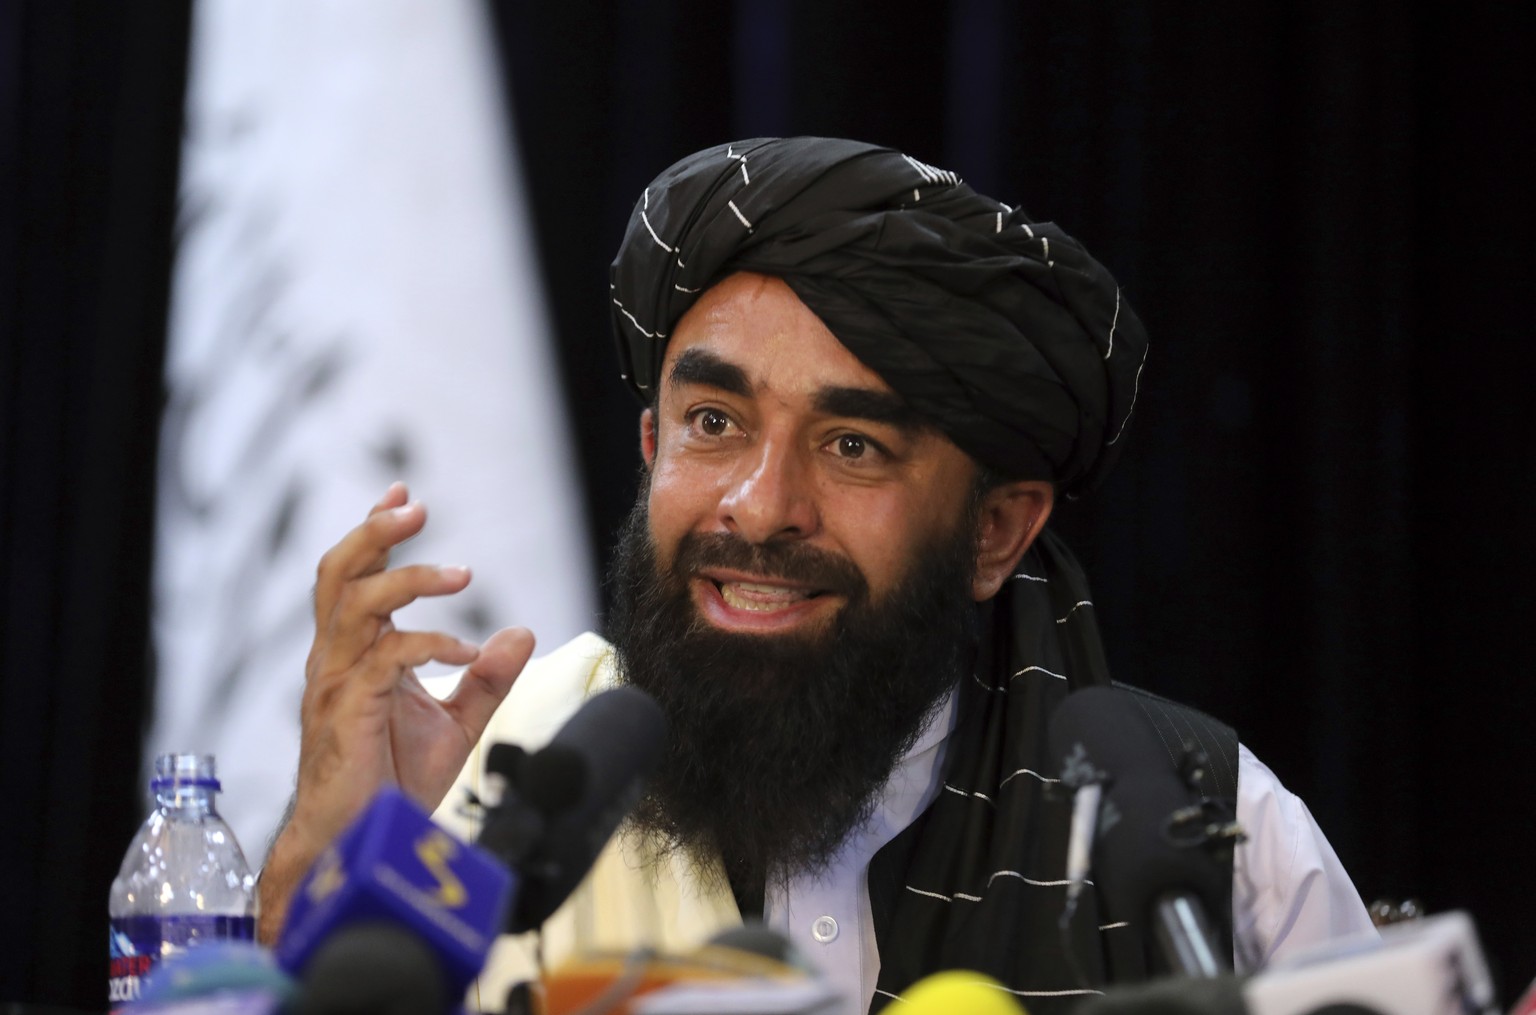 In front of a Taliban flag, Taliban spokesman Zabihullah Mujahid speaks at at his first news conference, in Kabul, Afghanistan, Tuesday, Aug. 17, 2021. For years, Mujahid had been a shadowy figure iss ...